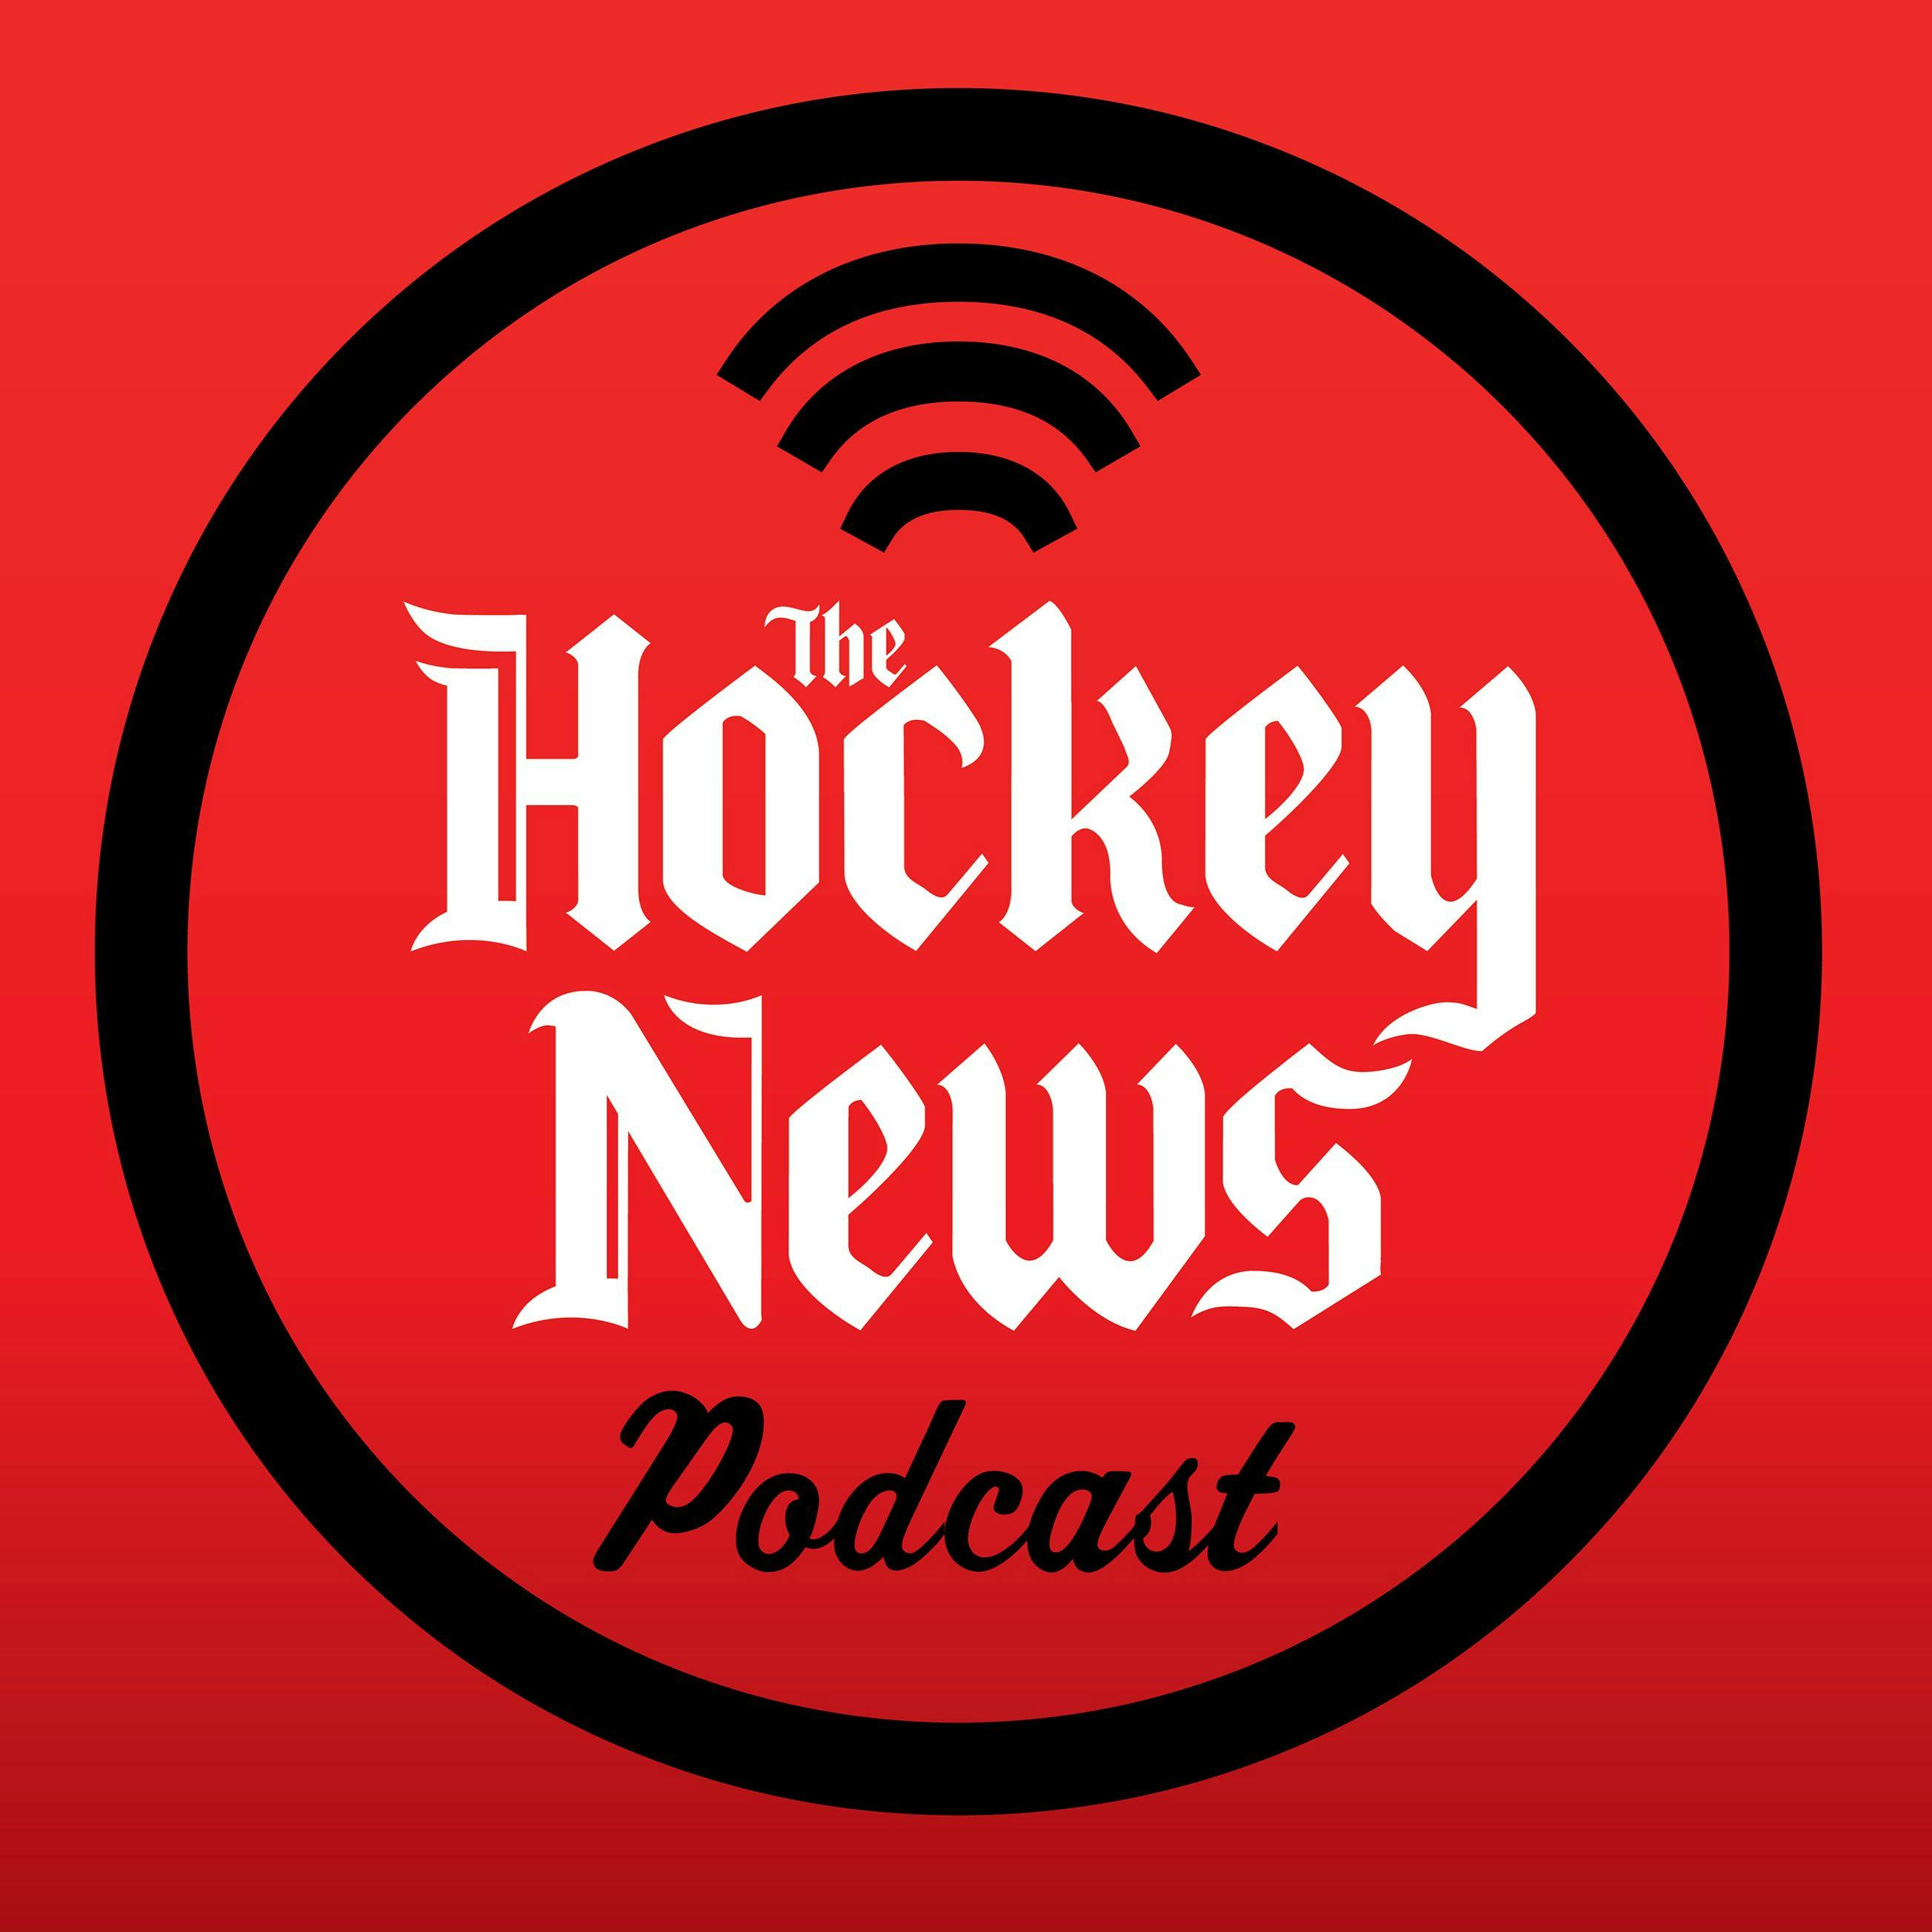 The Hockey News Podcast: Should the Maple Leafs Panic?